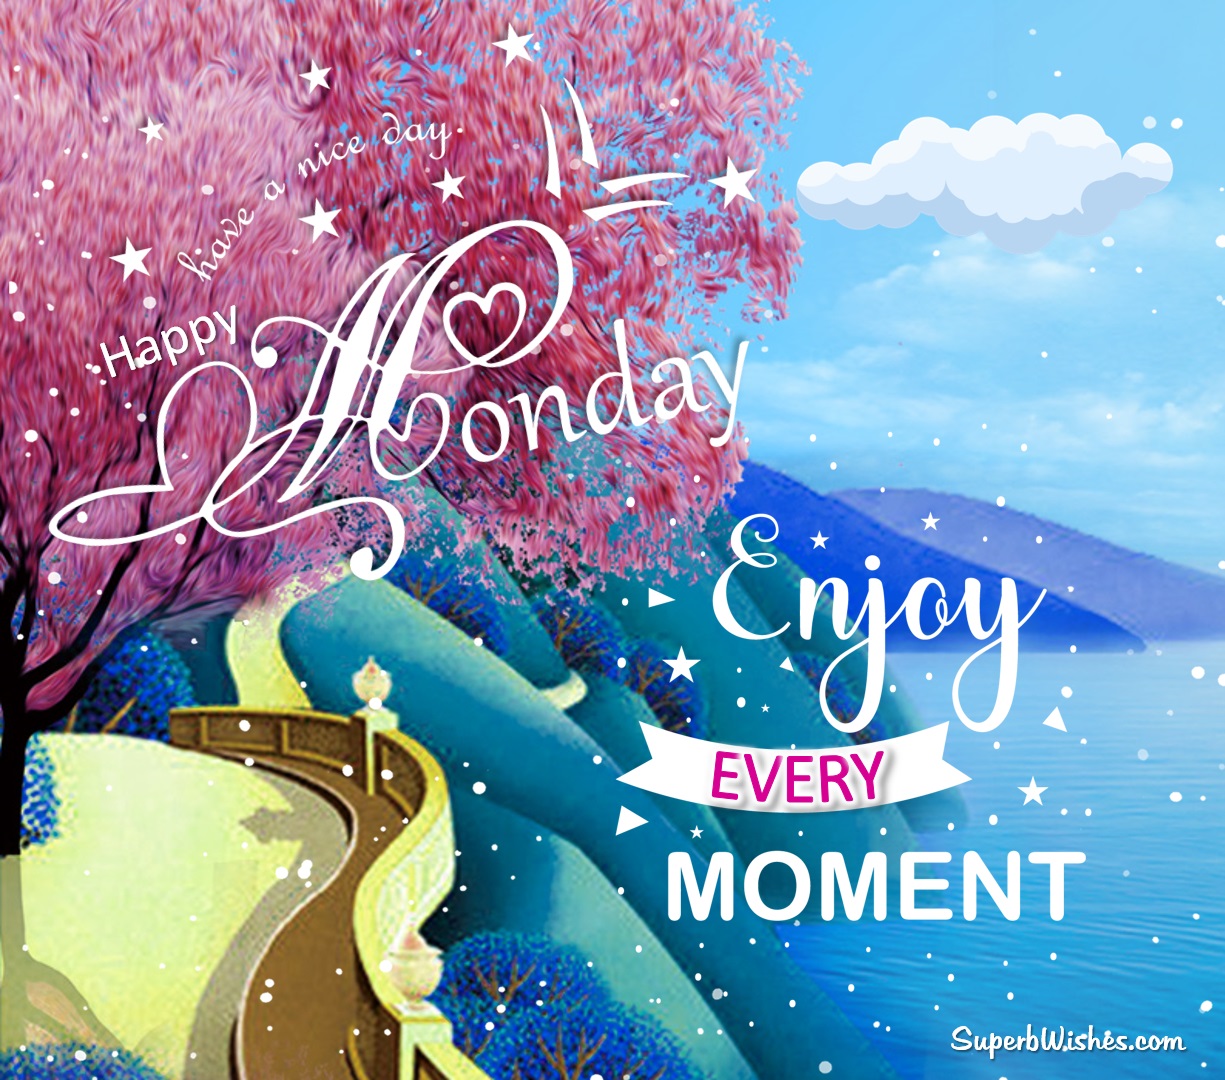 Happy Monday Images | Beautiful Monday Pictures | SuperbWishes